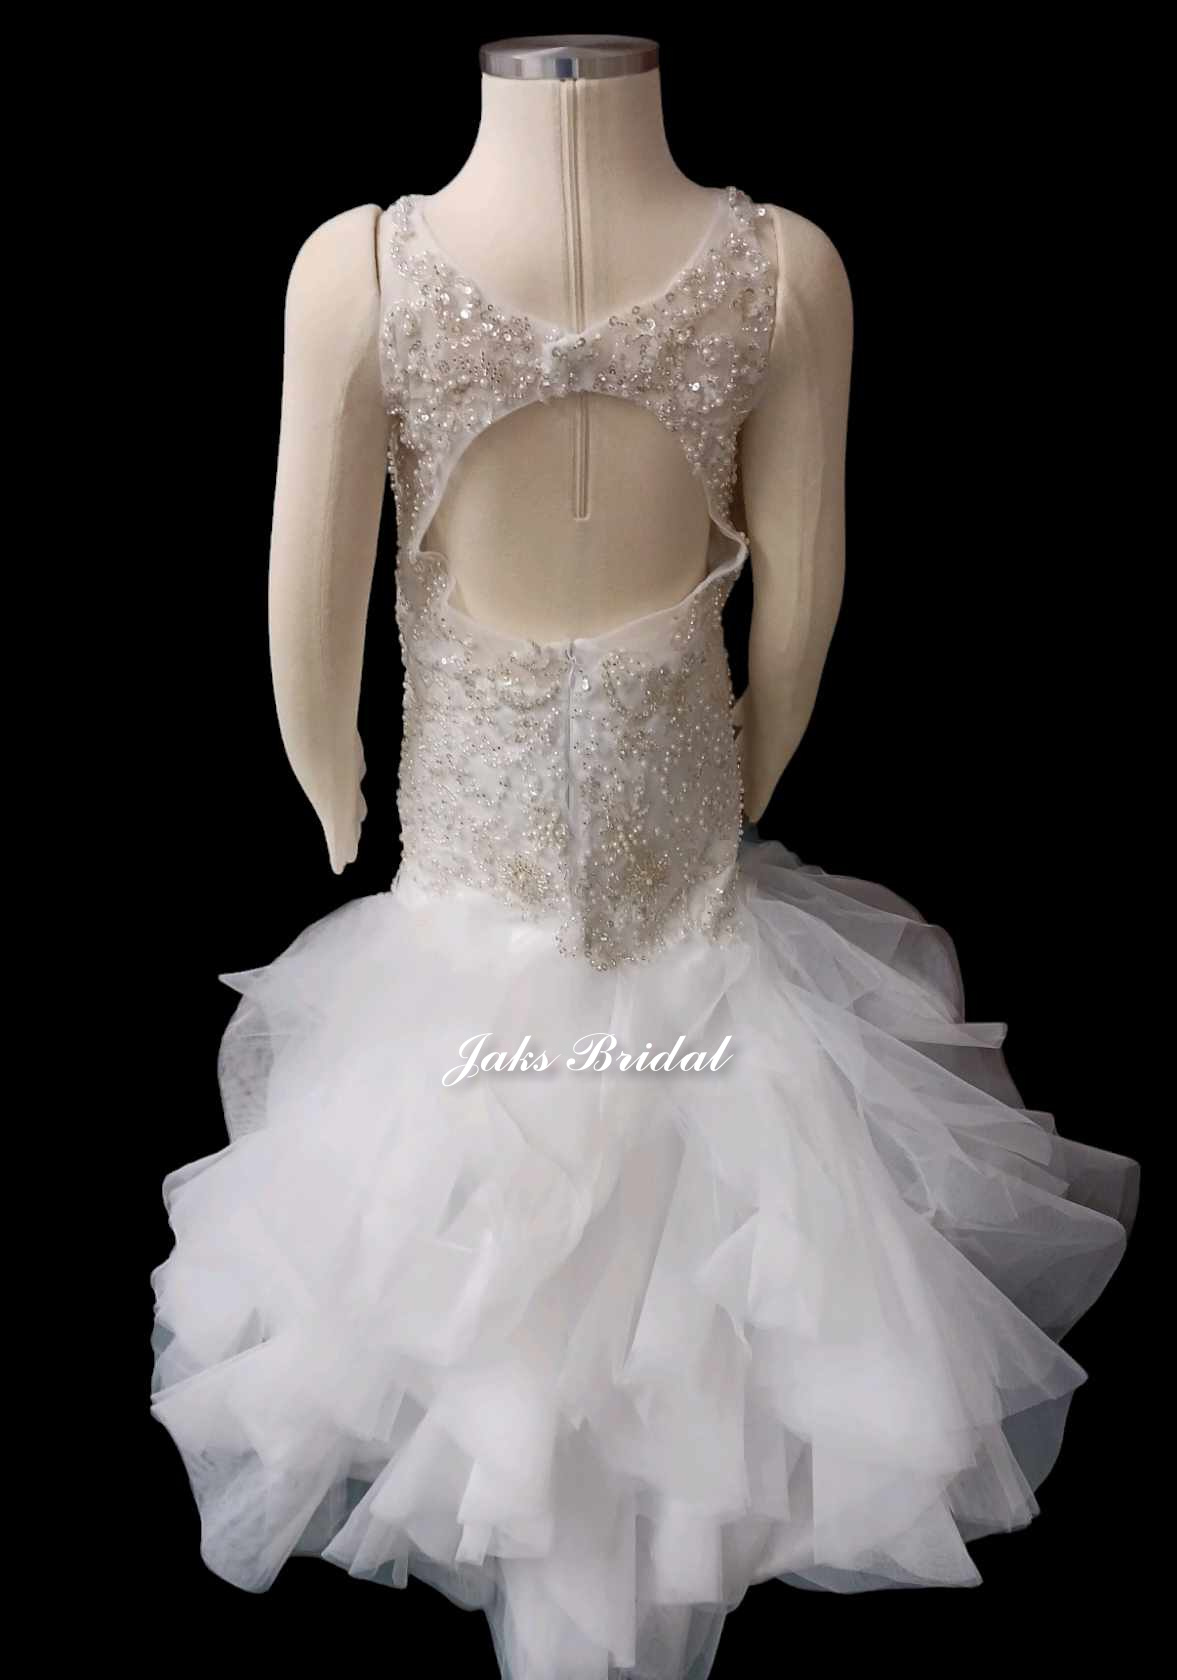 Stunning heavily beaded illusion tank-style gown with dropped waist, tiered tulle skirt, and open back